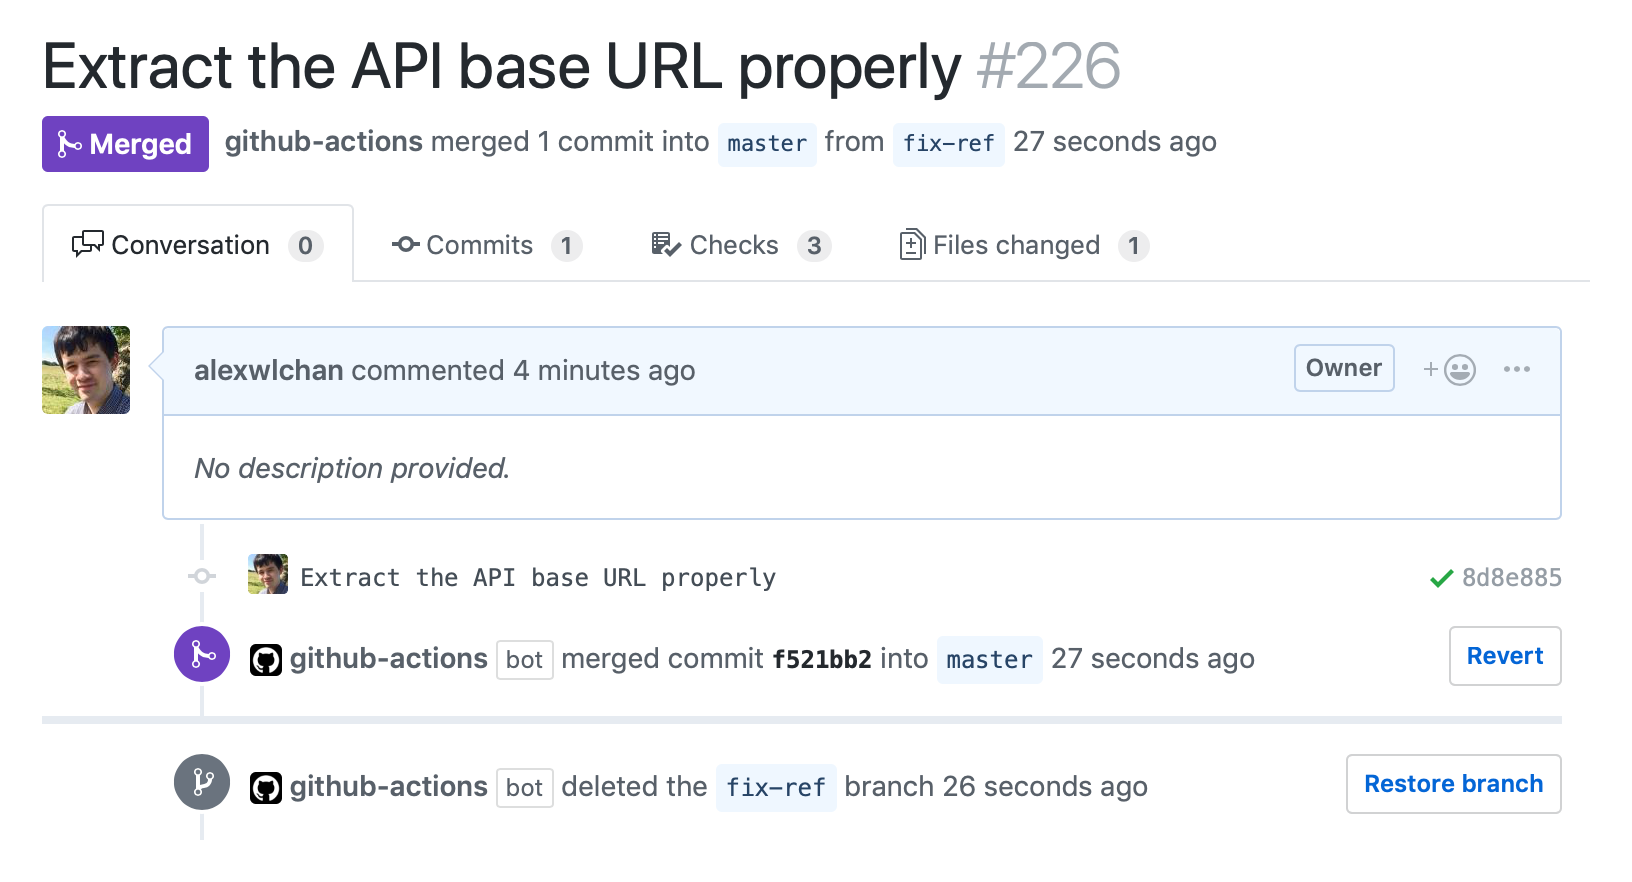 A screenshot of the GitHub pull request UI, showing the github-actions bot merging and deleting a branch.